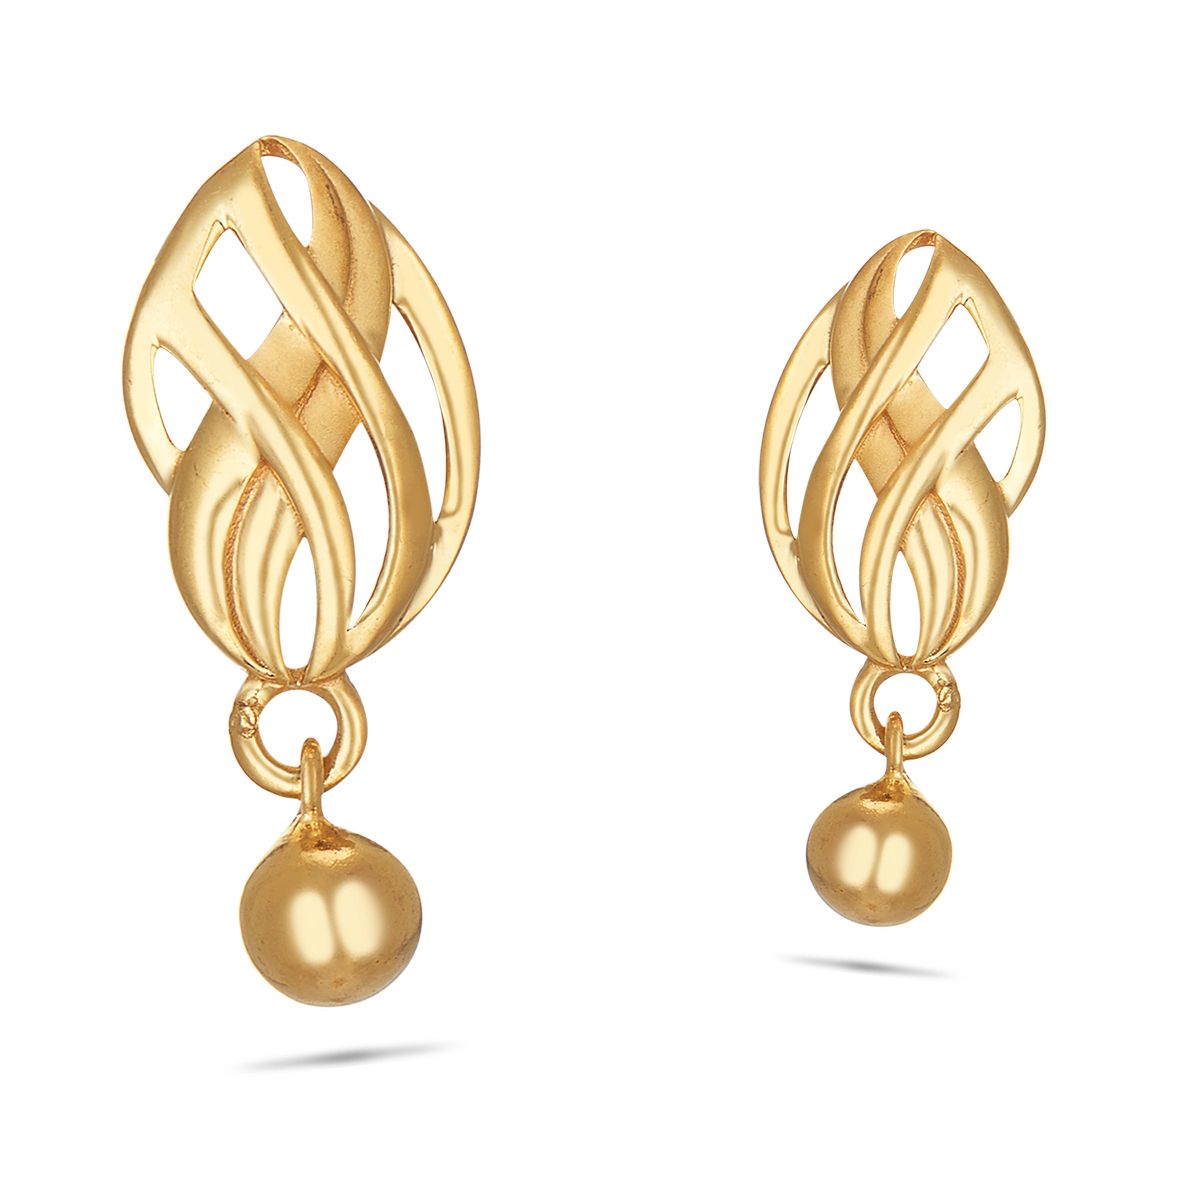 7 Top Lightweight Gold Earrings Designs for Daily Use 2023